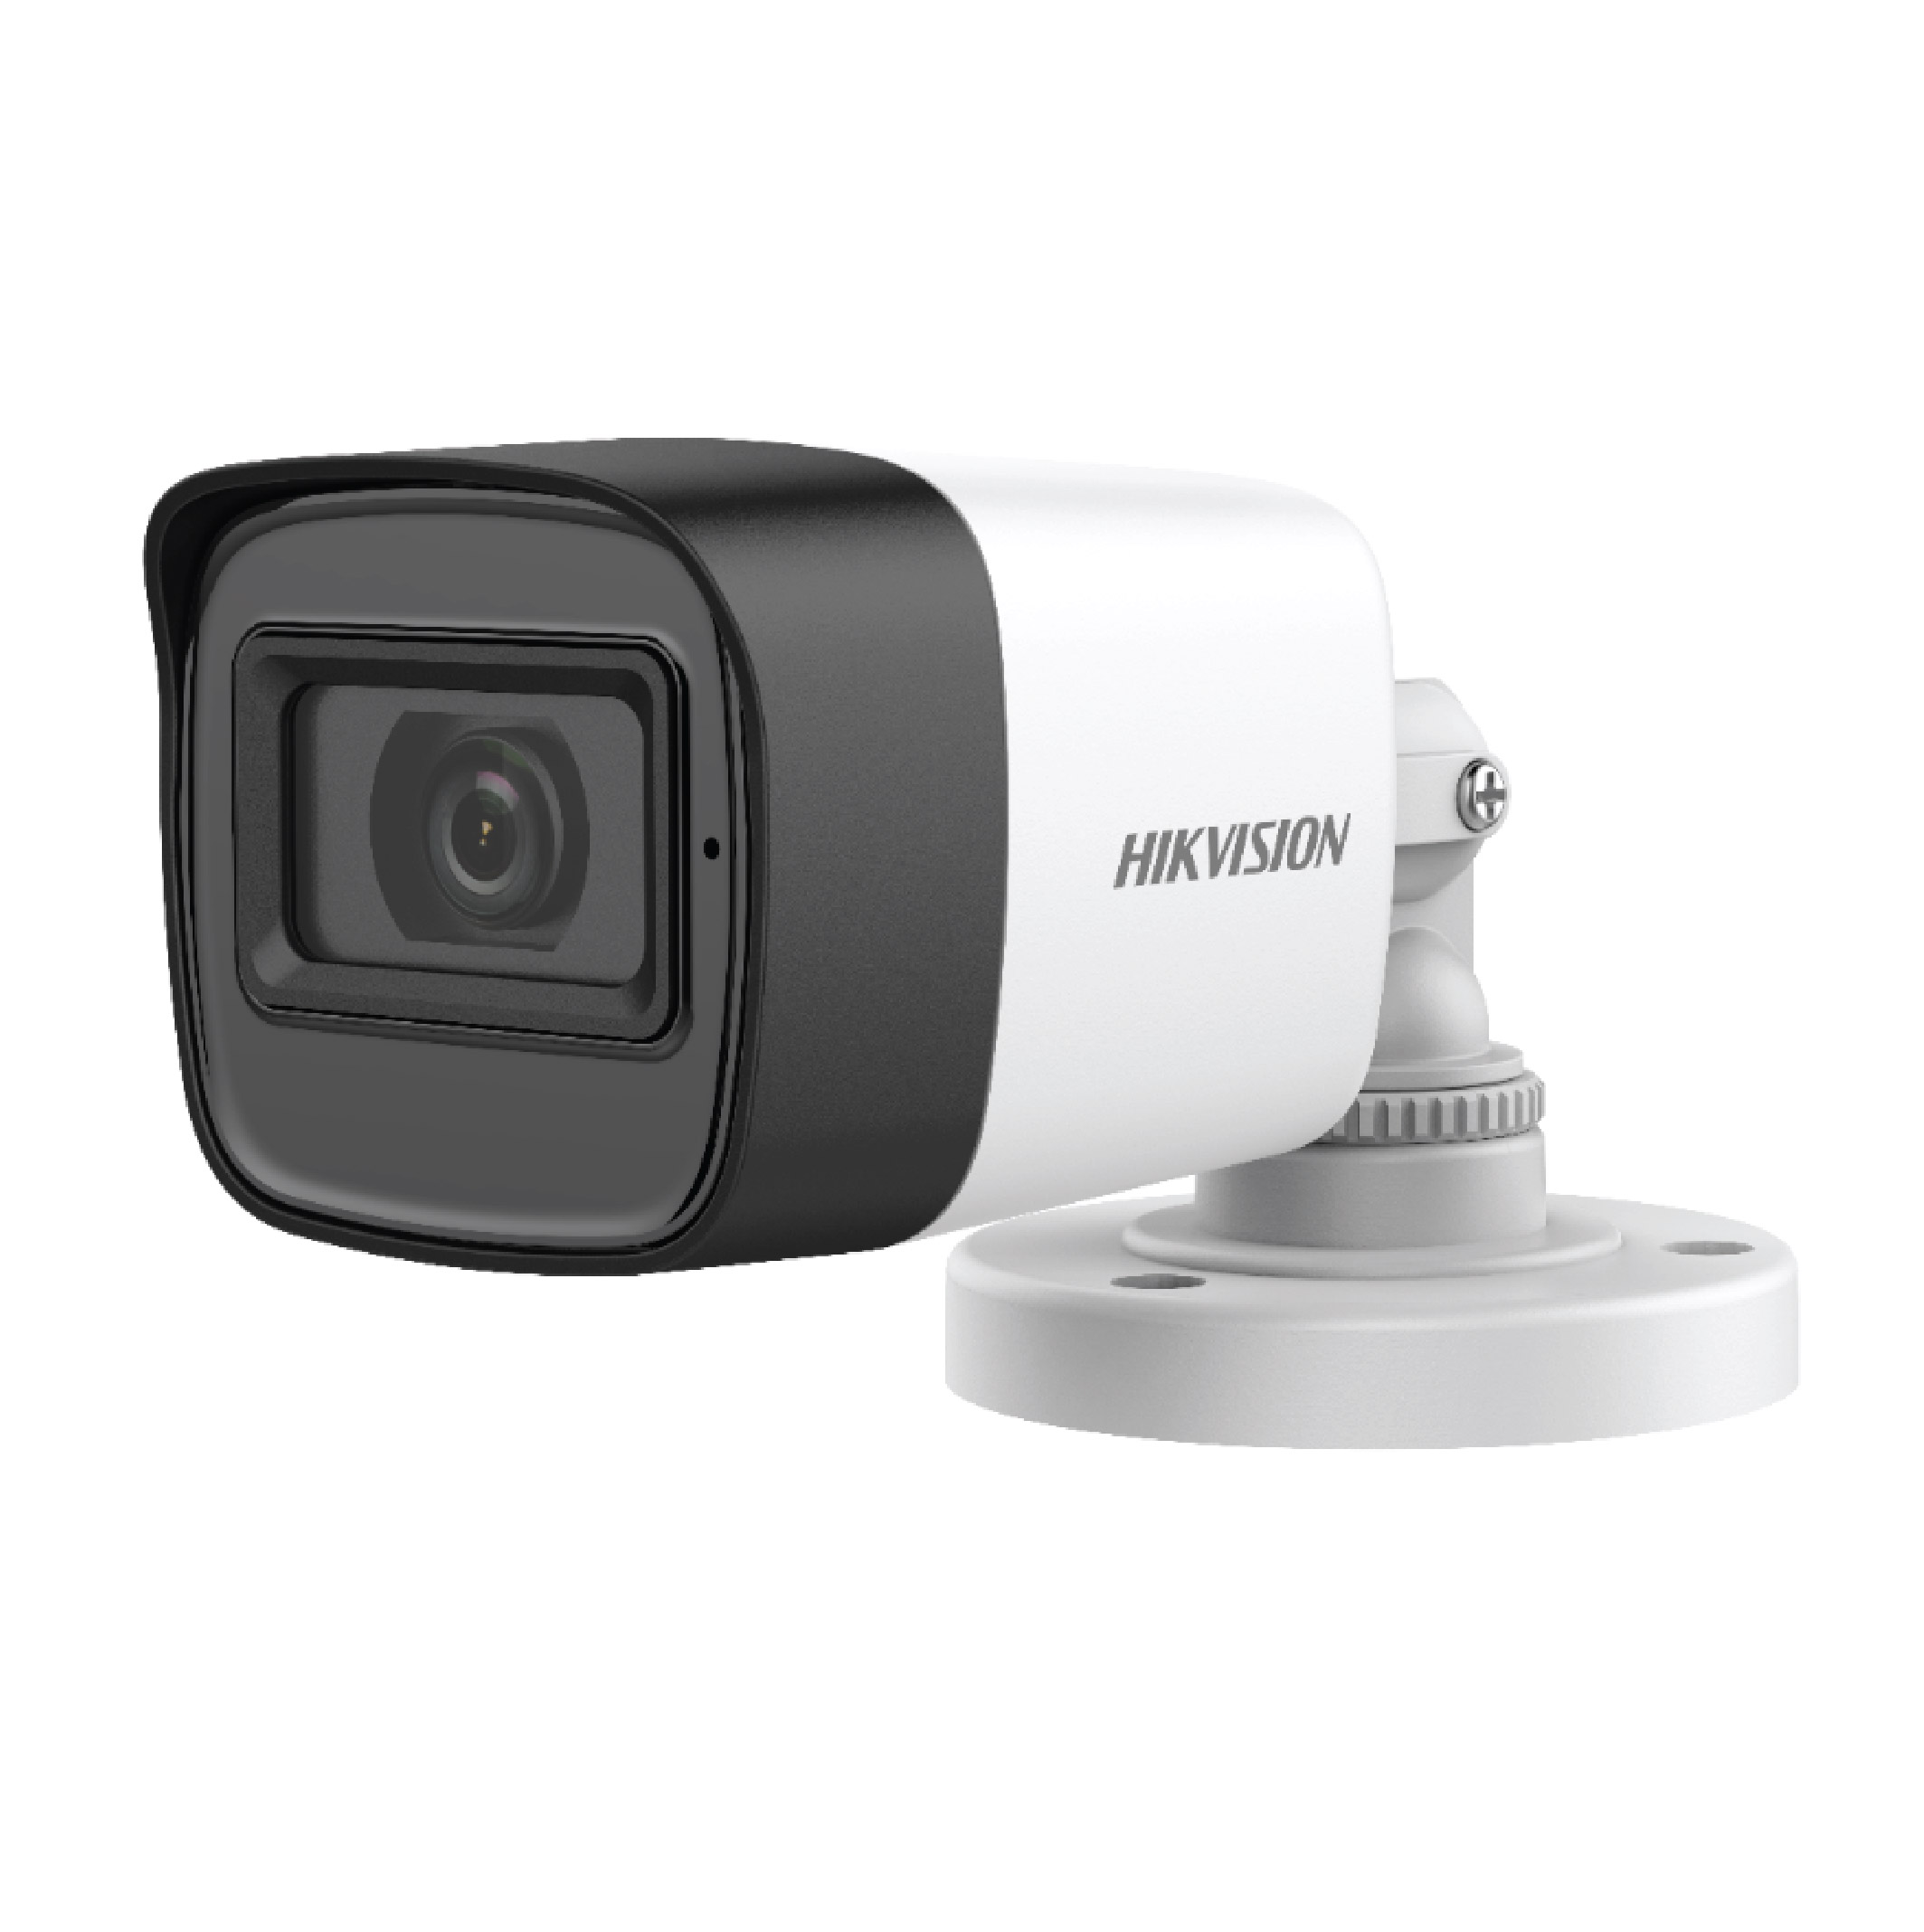 HIKVISION DS-2CE16D0T-ITPFS Turbo HD Camera